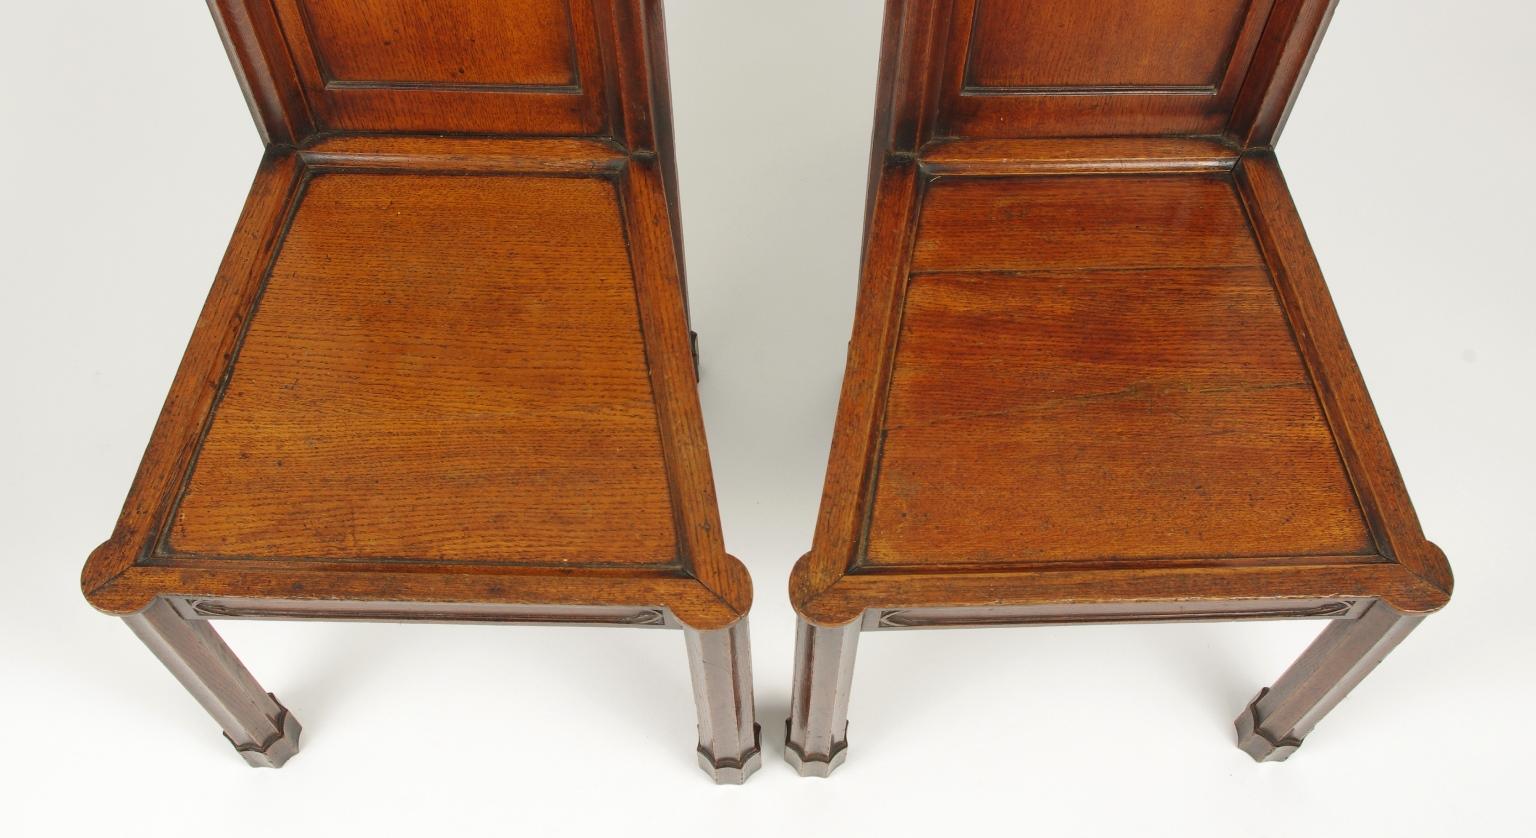 Gothic Revival Pair of George III Oak Gothic Hall Chairs, circa 1800